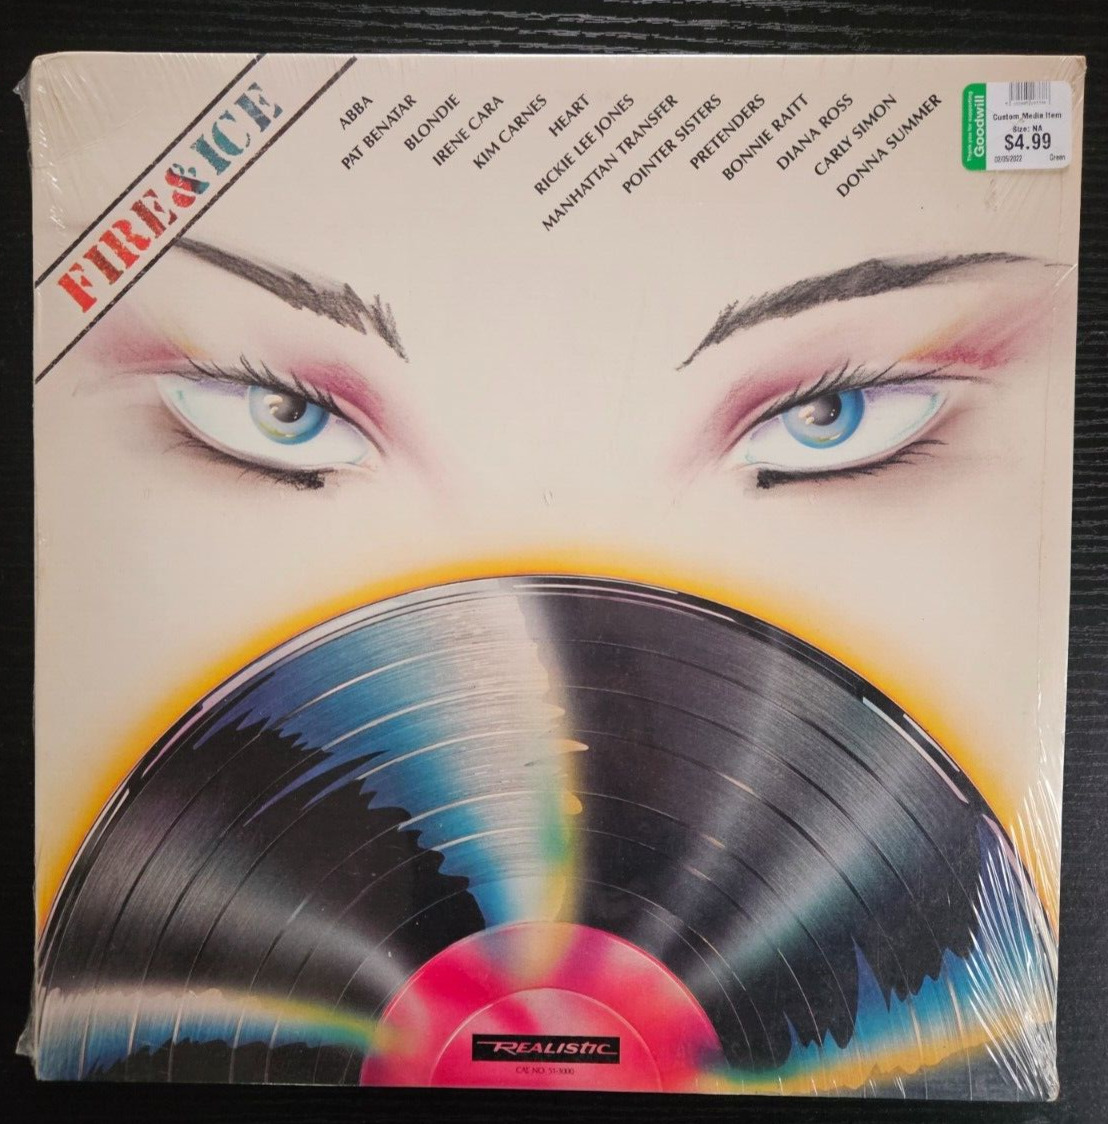 Fire and Ice -Abba, Blondie, Pretenders, Diana Ross & more record LP SEALED!!